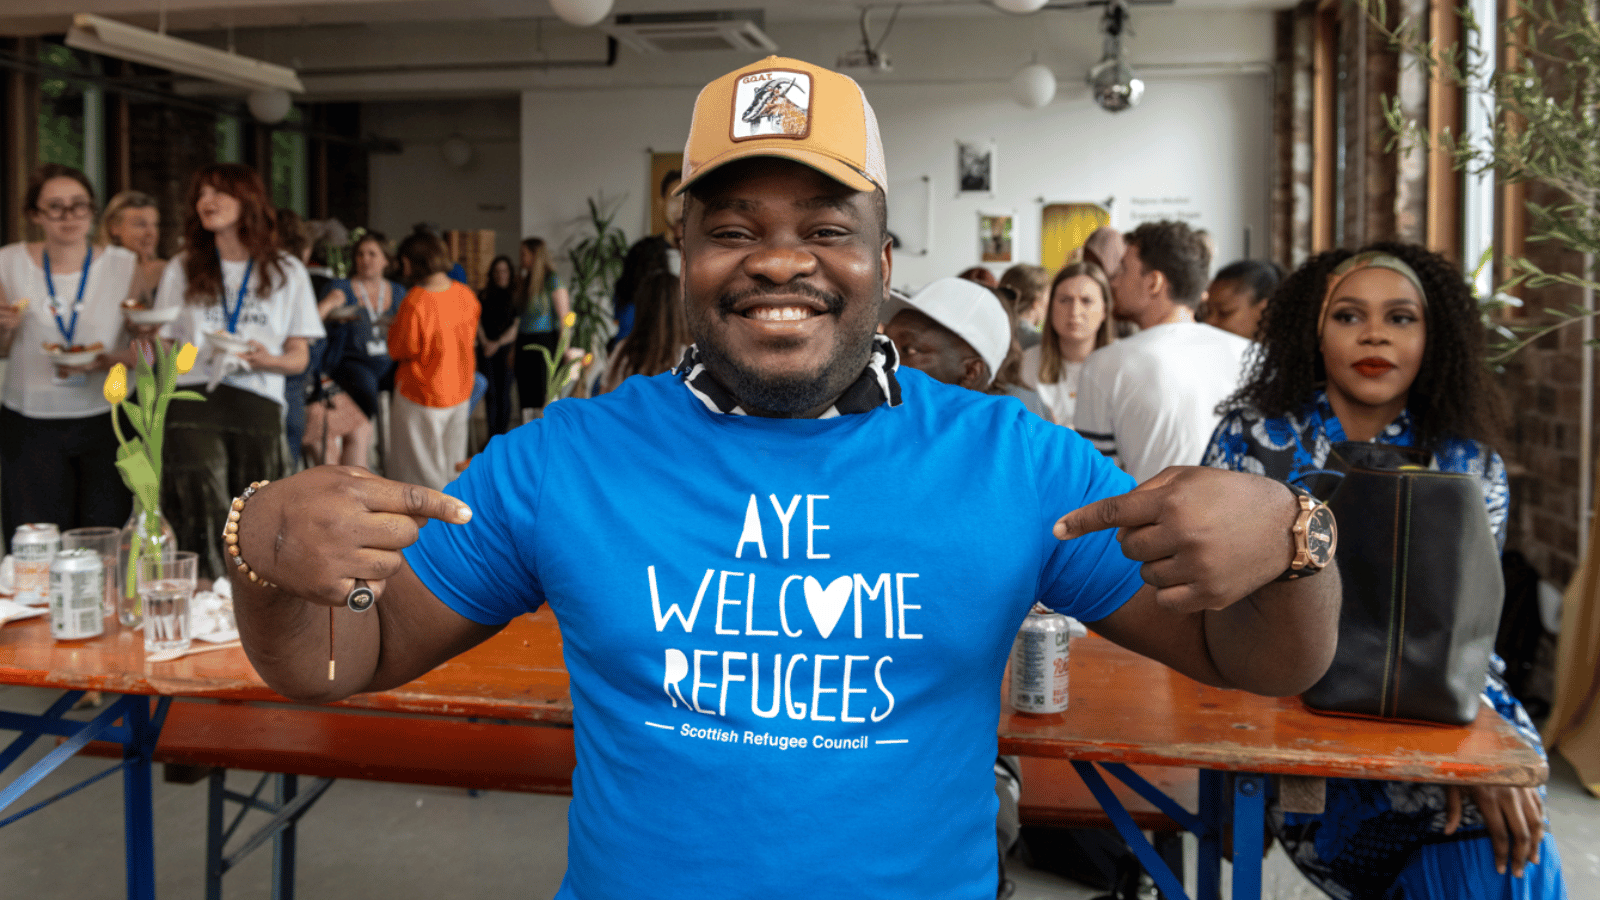 Get your Aye Welcome Refugees t-shirts and tote bags